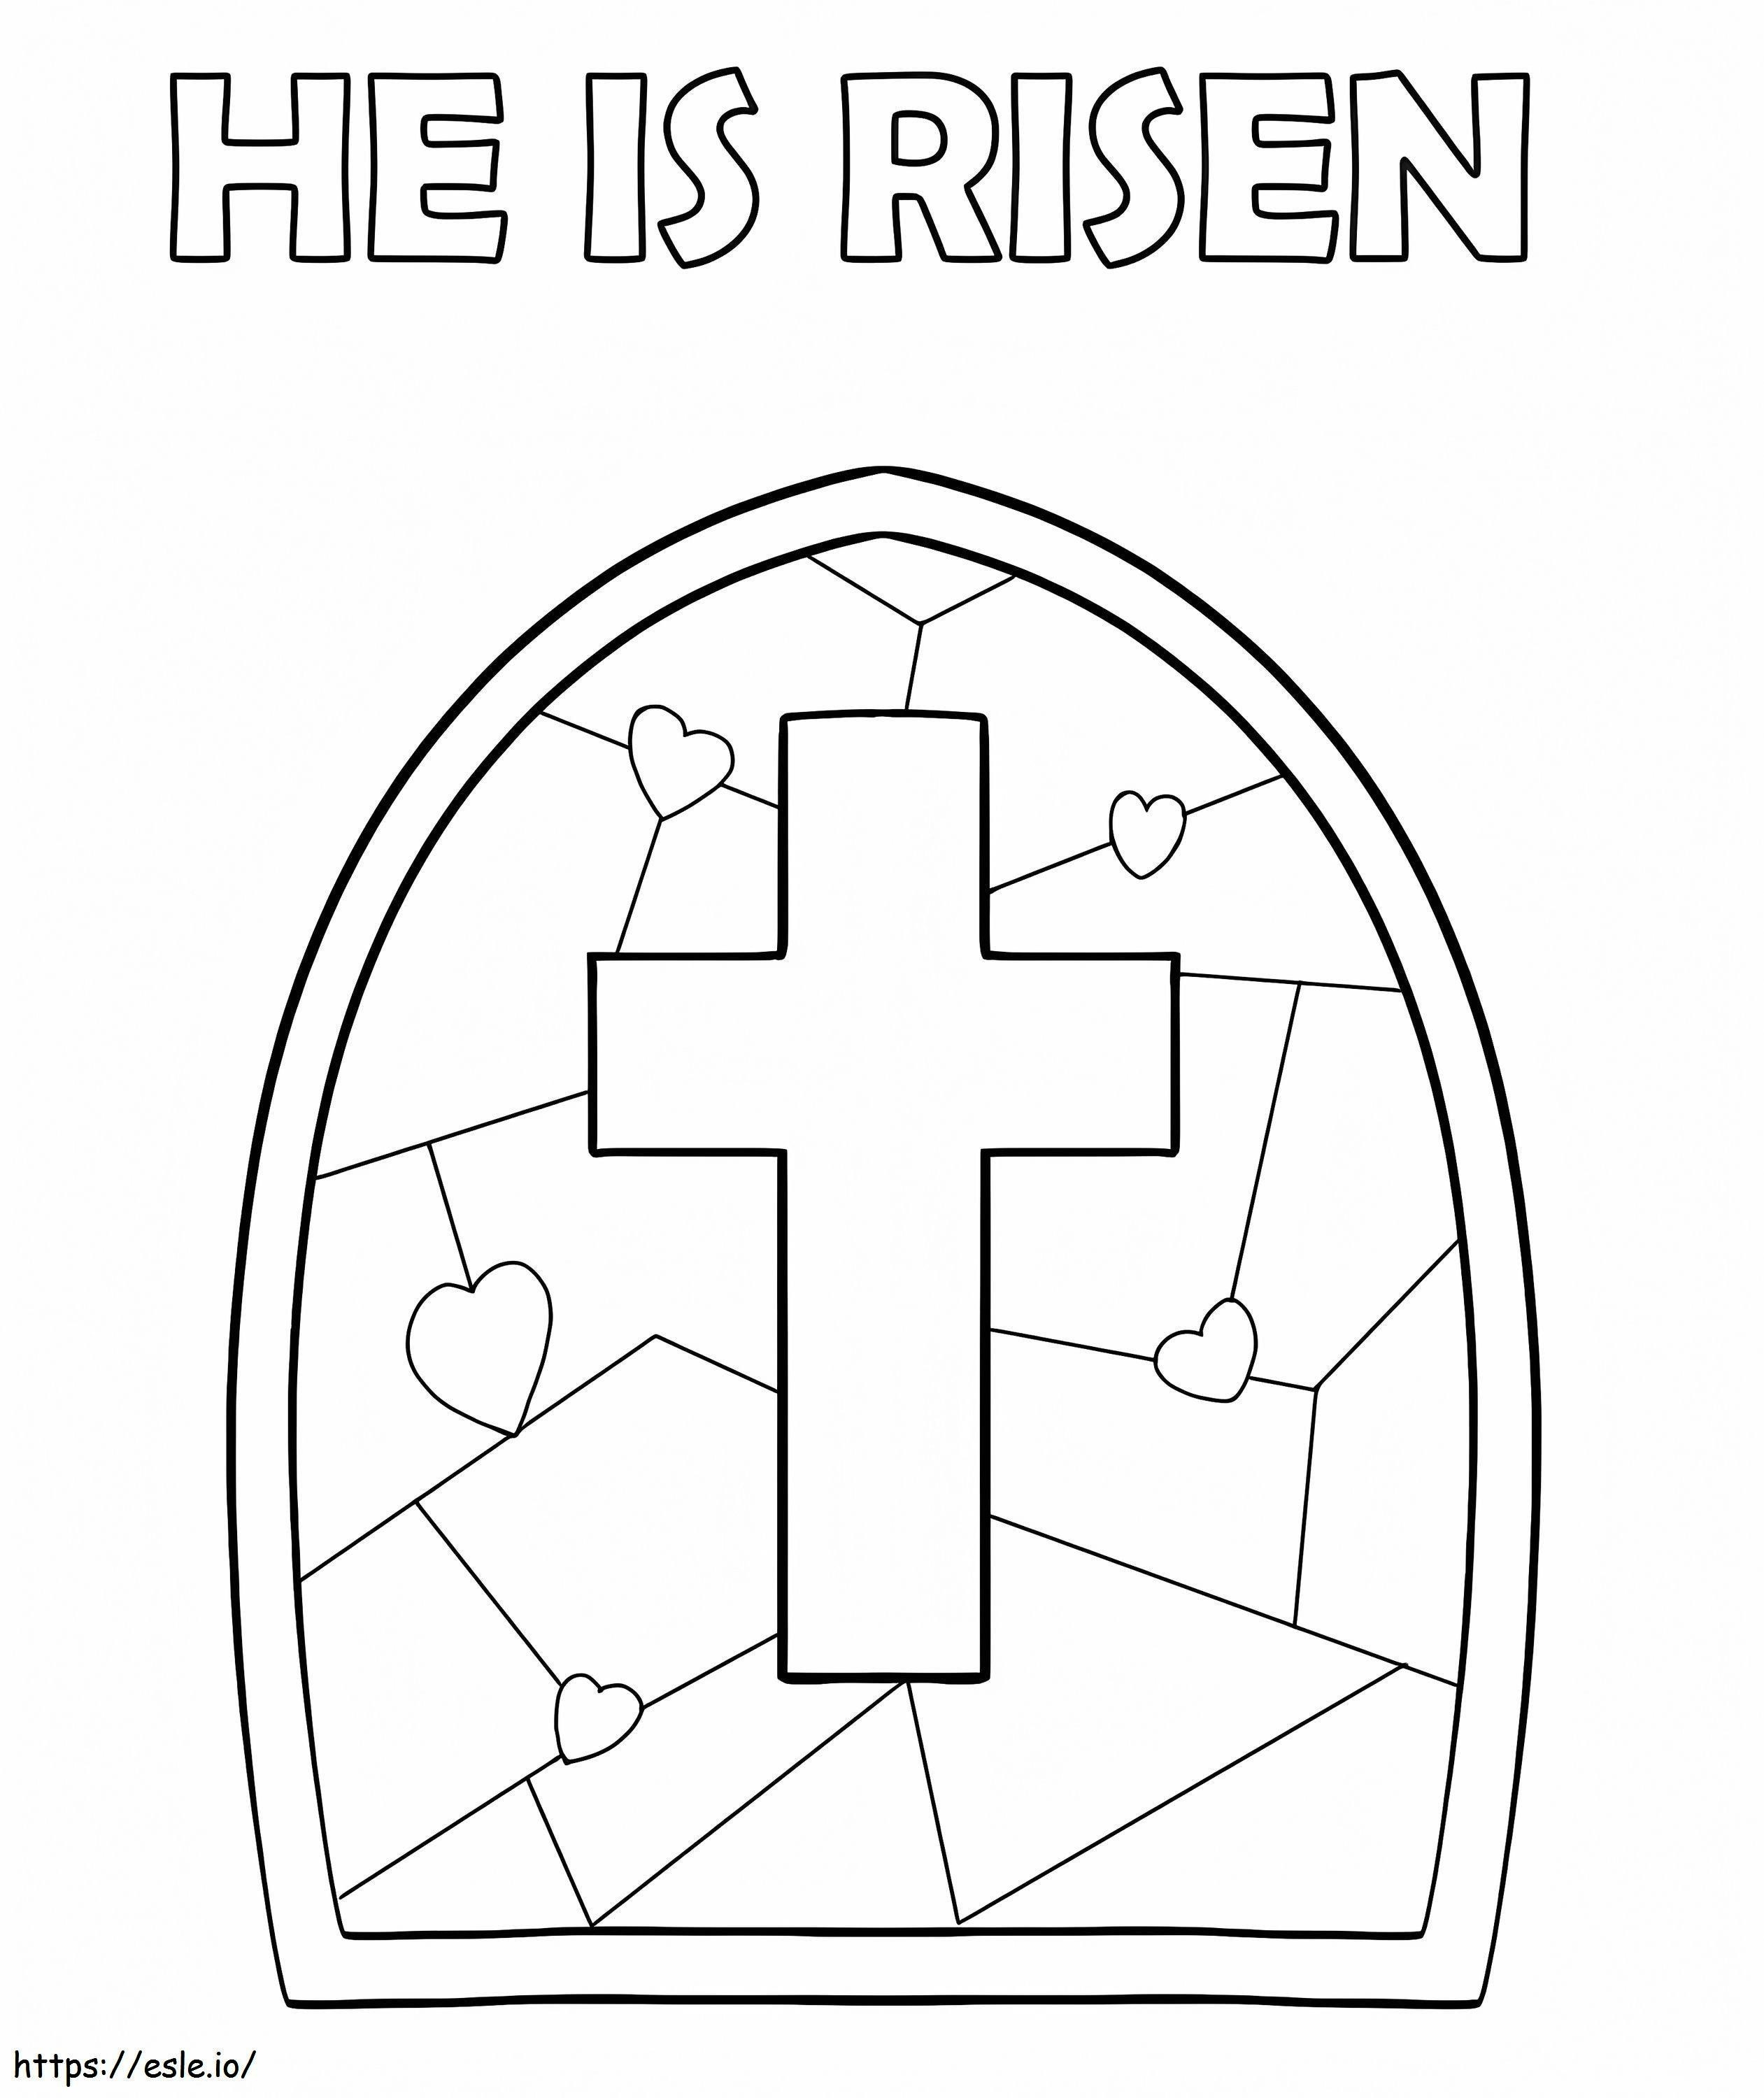 He Is Risen 2 coloring page